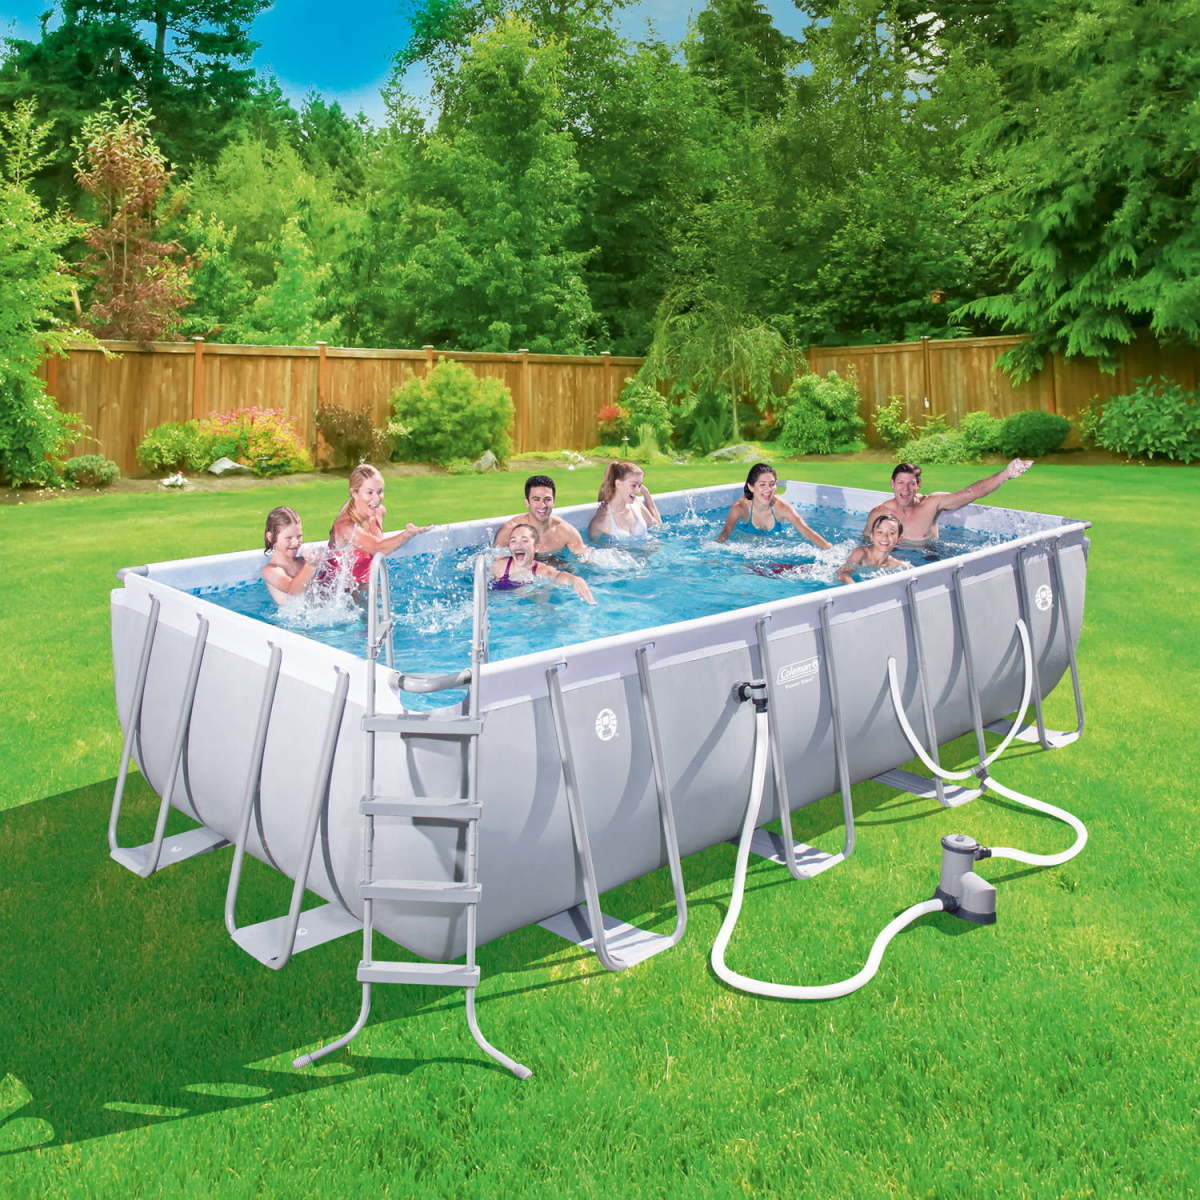 New Coleman Above Ground Swimming Pools with Simple Decor